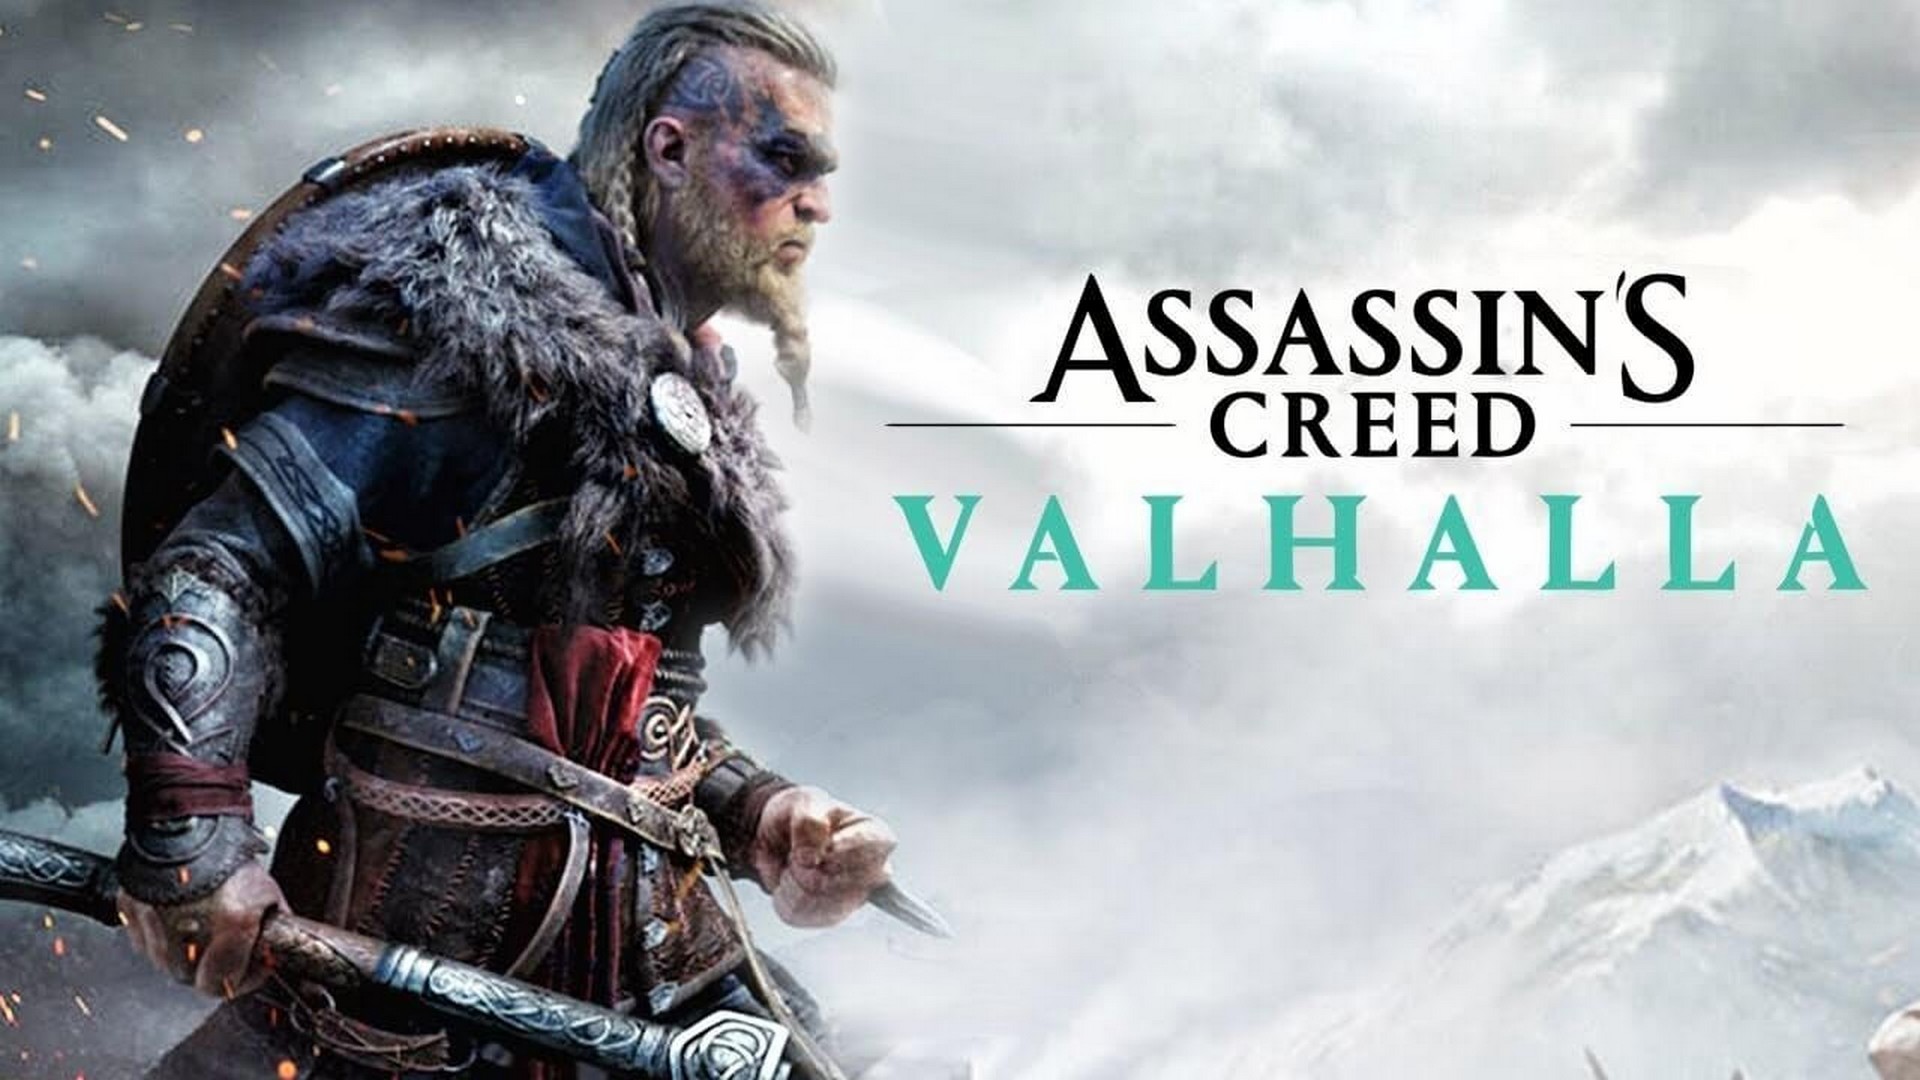 Play Assassin’s Creed Valhalla For FREE This Weekend Starting Today